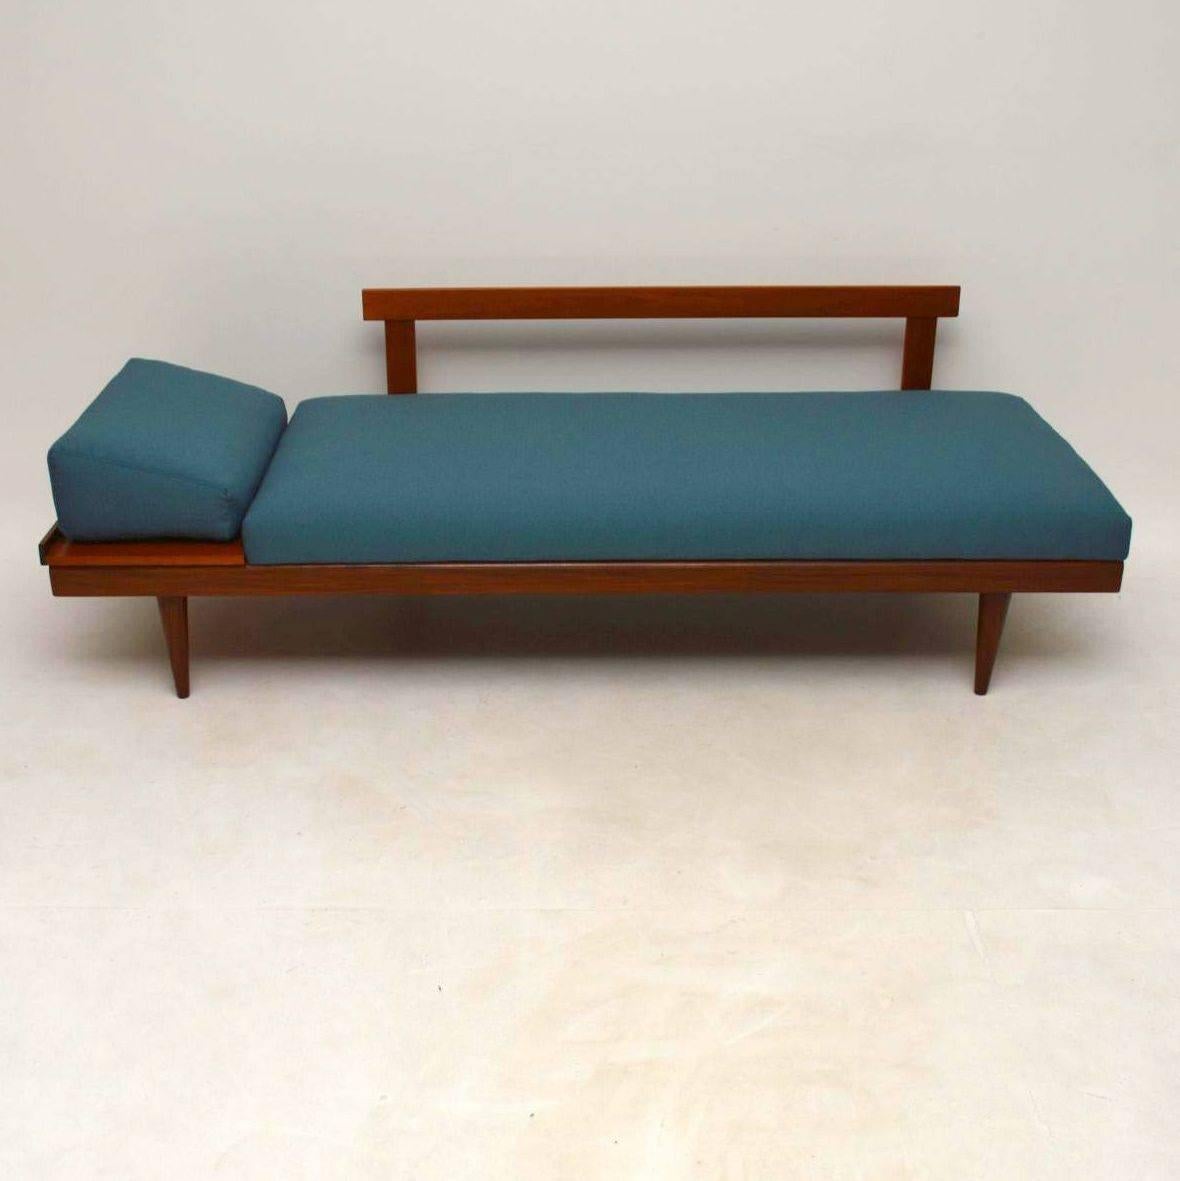 A stunning and very rare vintage sofa or daybed in teak, this was designed by Ingmar Relling. It was made in Norway and dates from the 1950s-1960s. The quality is absolutely superb, and the condition is amazing throughout. We have had the entire